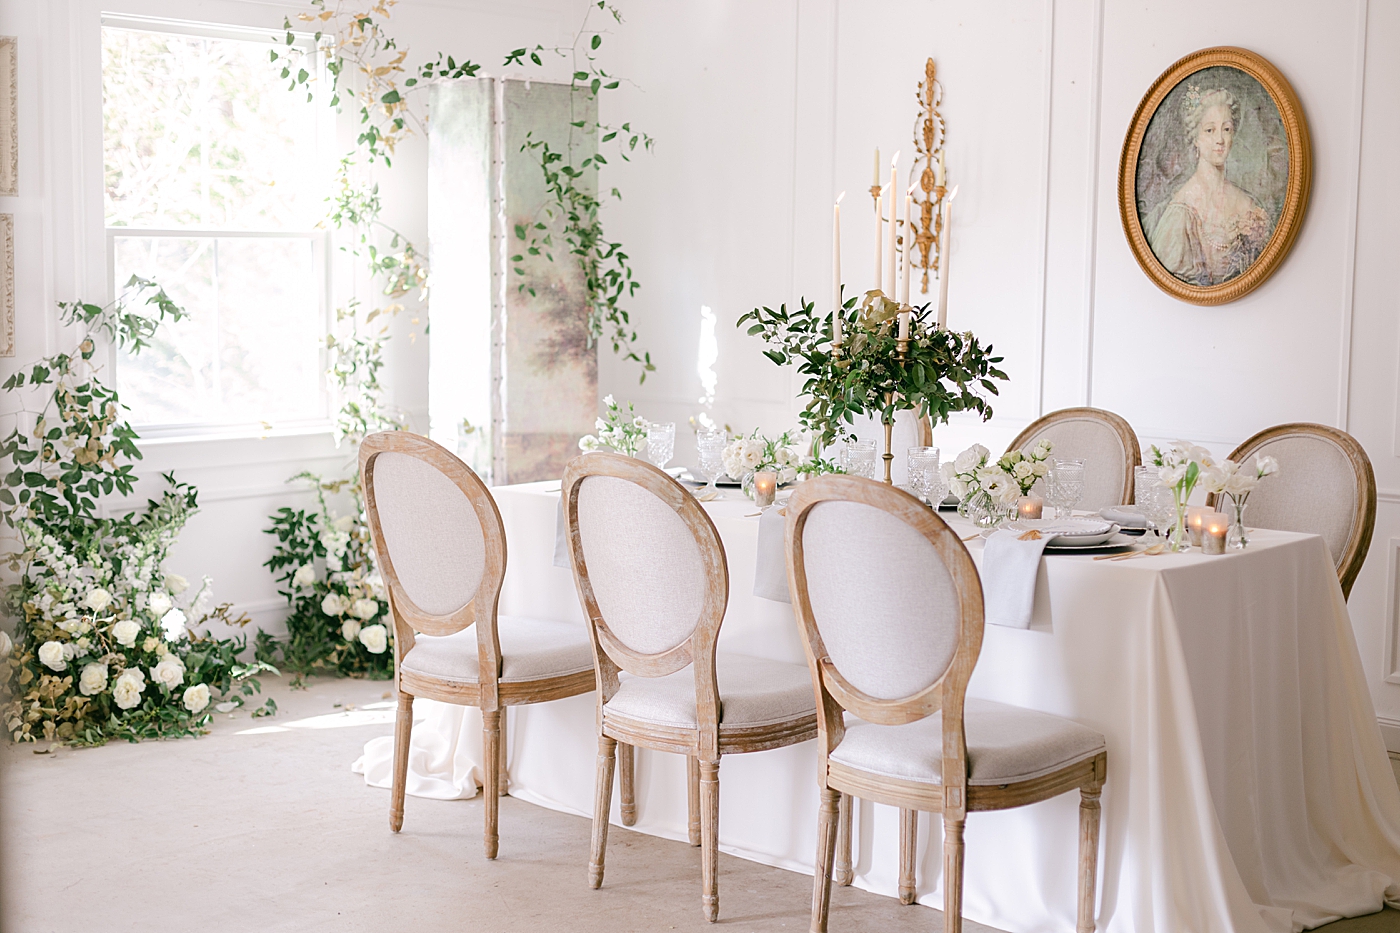 Styled table with flowers and chairs | Photo by Hope Helmuth Photograpghy